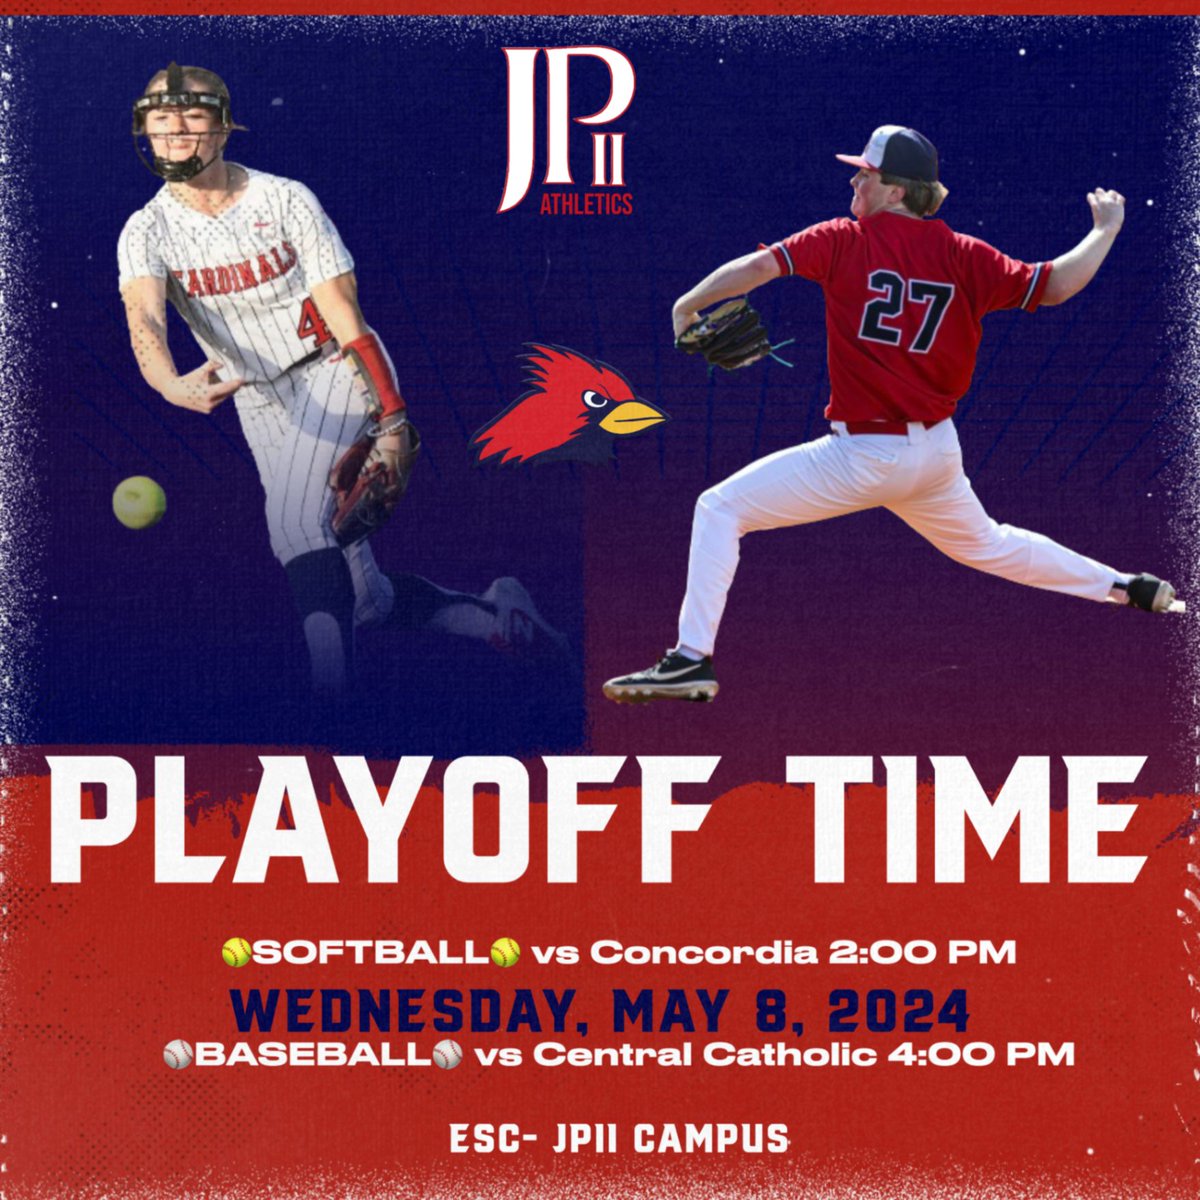 IT'S PLAYOFF TIME CARDINALS! Come out to the ESC for the doubleheader! Softball will play Concordia Lutheran at 2:00pm and baseball plays Central Catholic at 4:00pm. Good luck Cards!